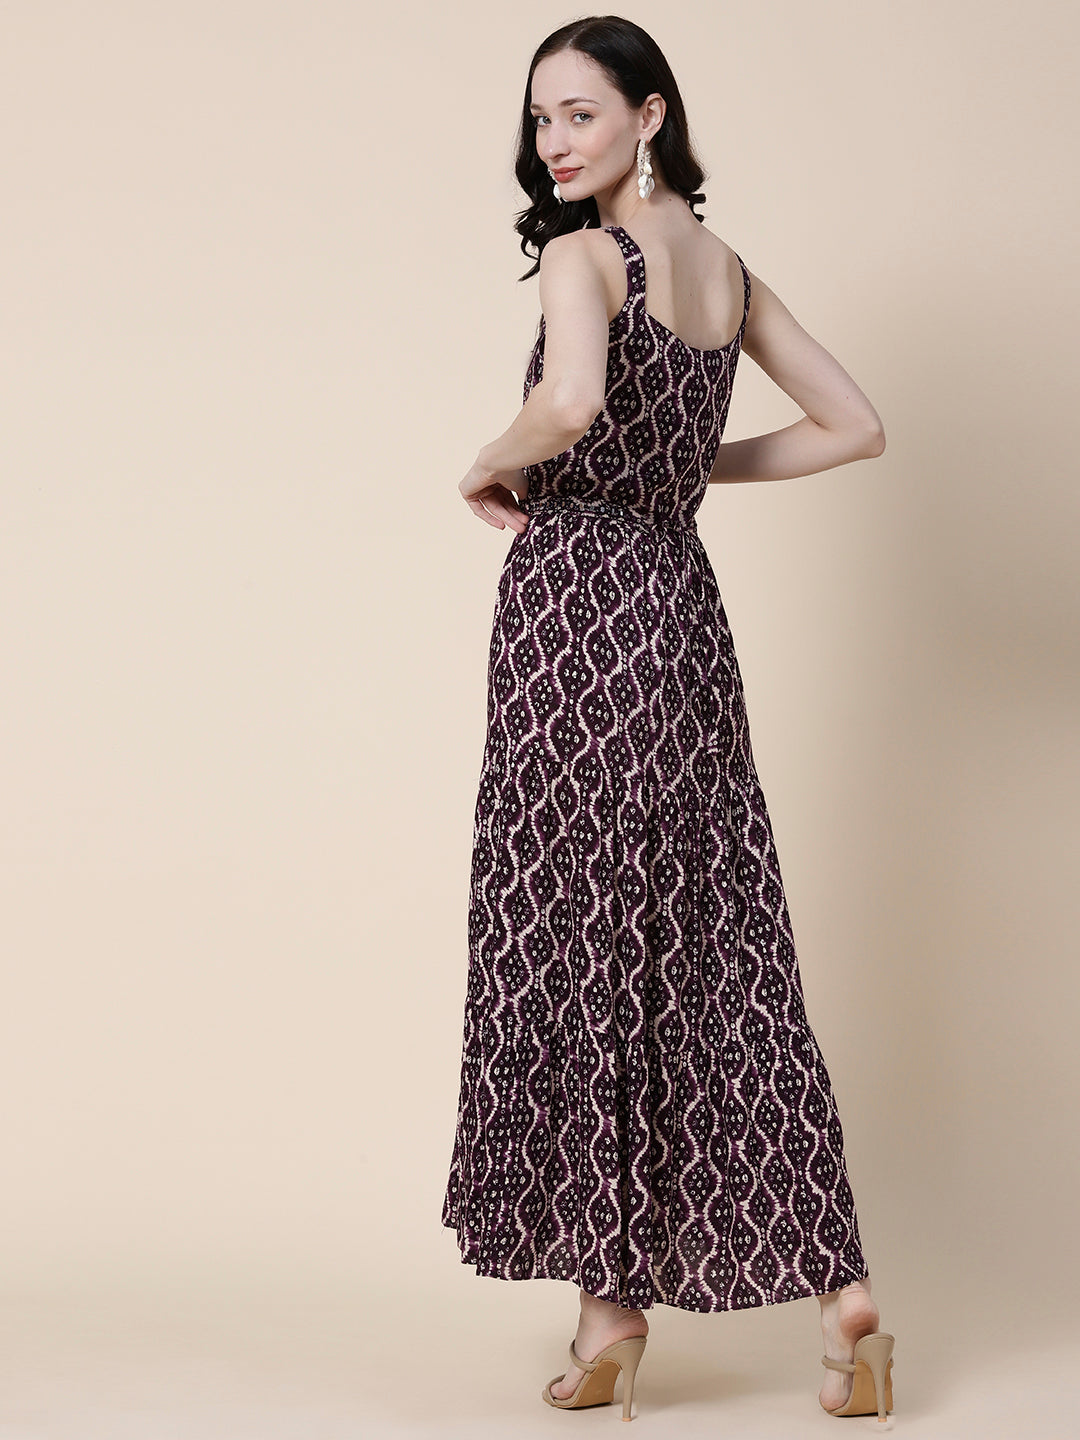 Ethnic Bandhani Printed & Embroidered A-Line Fit & Flare Maxi Dress - Violet